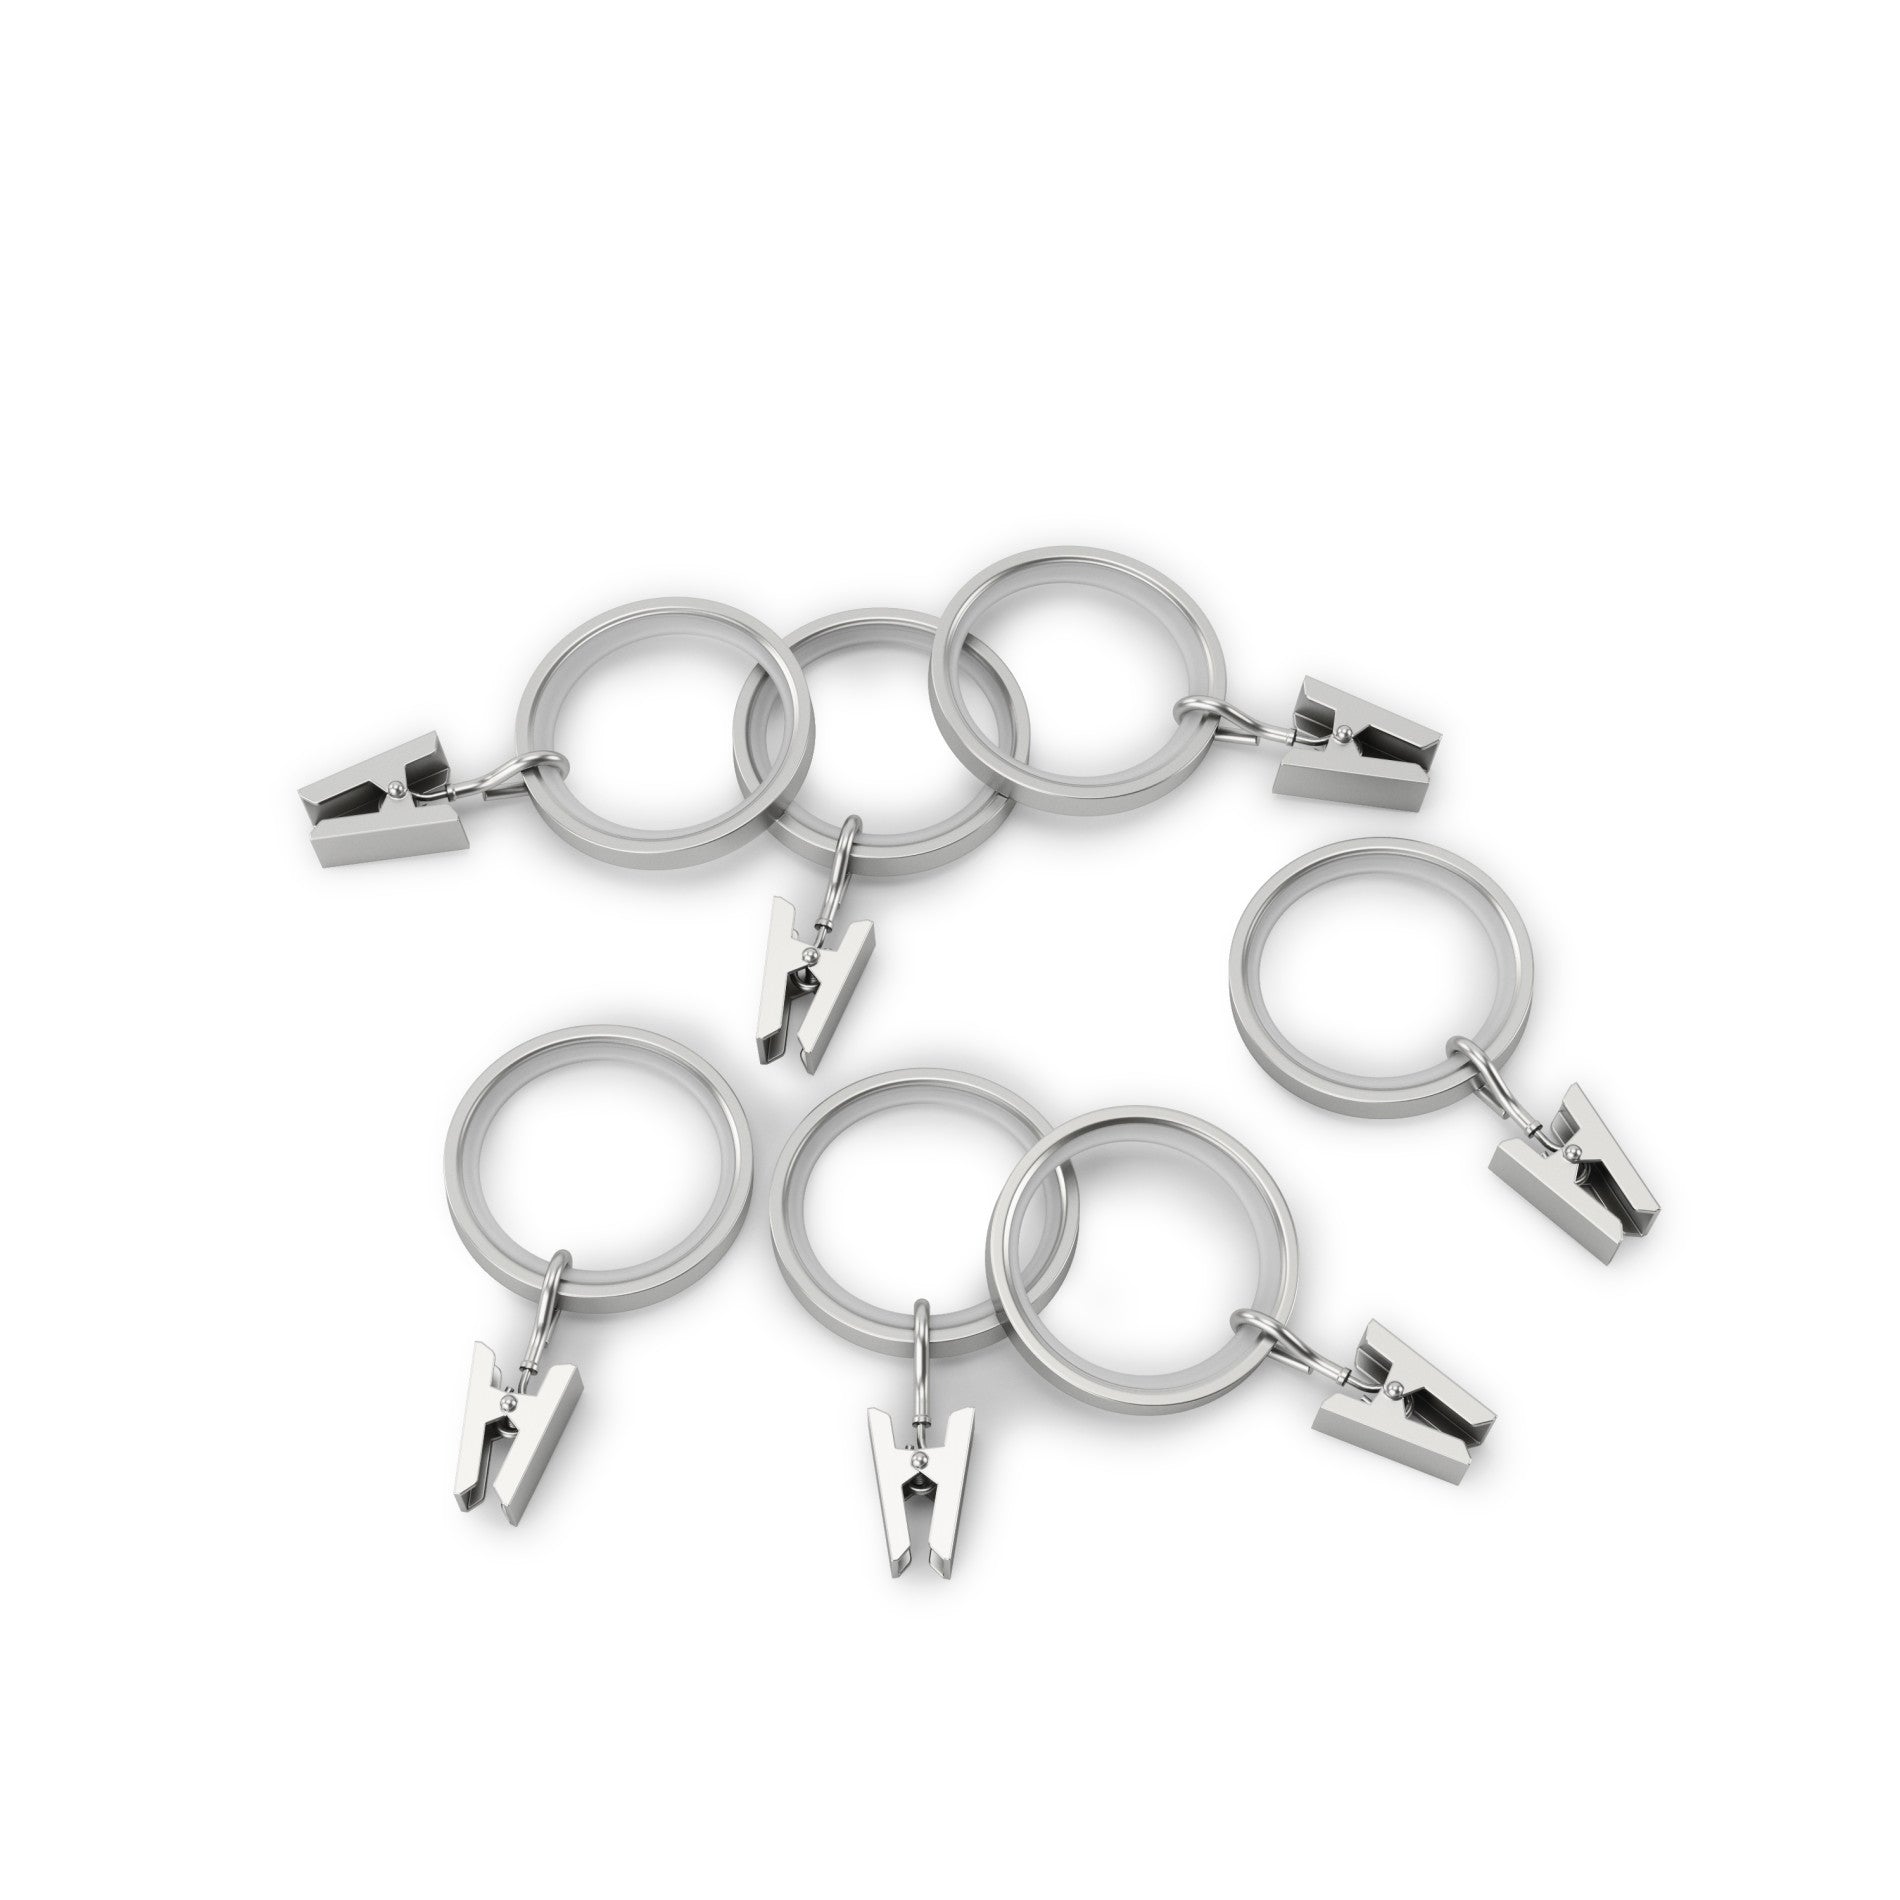 AUCHEN New Upgraded Set of 12 Shower Curtain Hooks,Stainless Steel Metal  Double Curtain Rings for Shower Rods Curtains-Premium 18/8 Stainless Steel-Double  Hooks with Easy Glide Rollers (Sliver) - Walmart.com